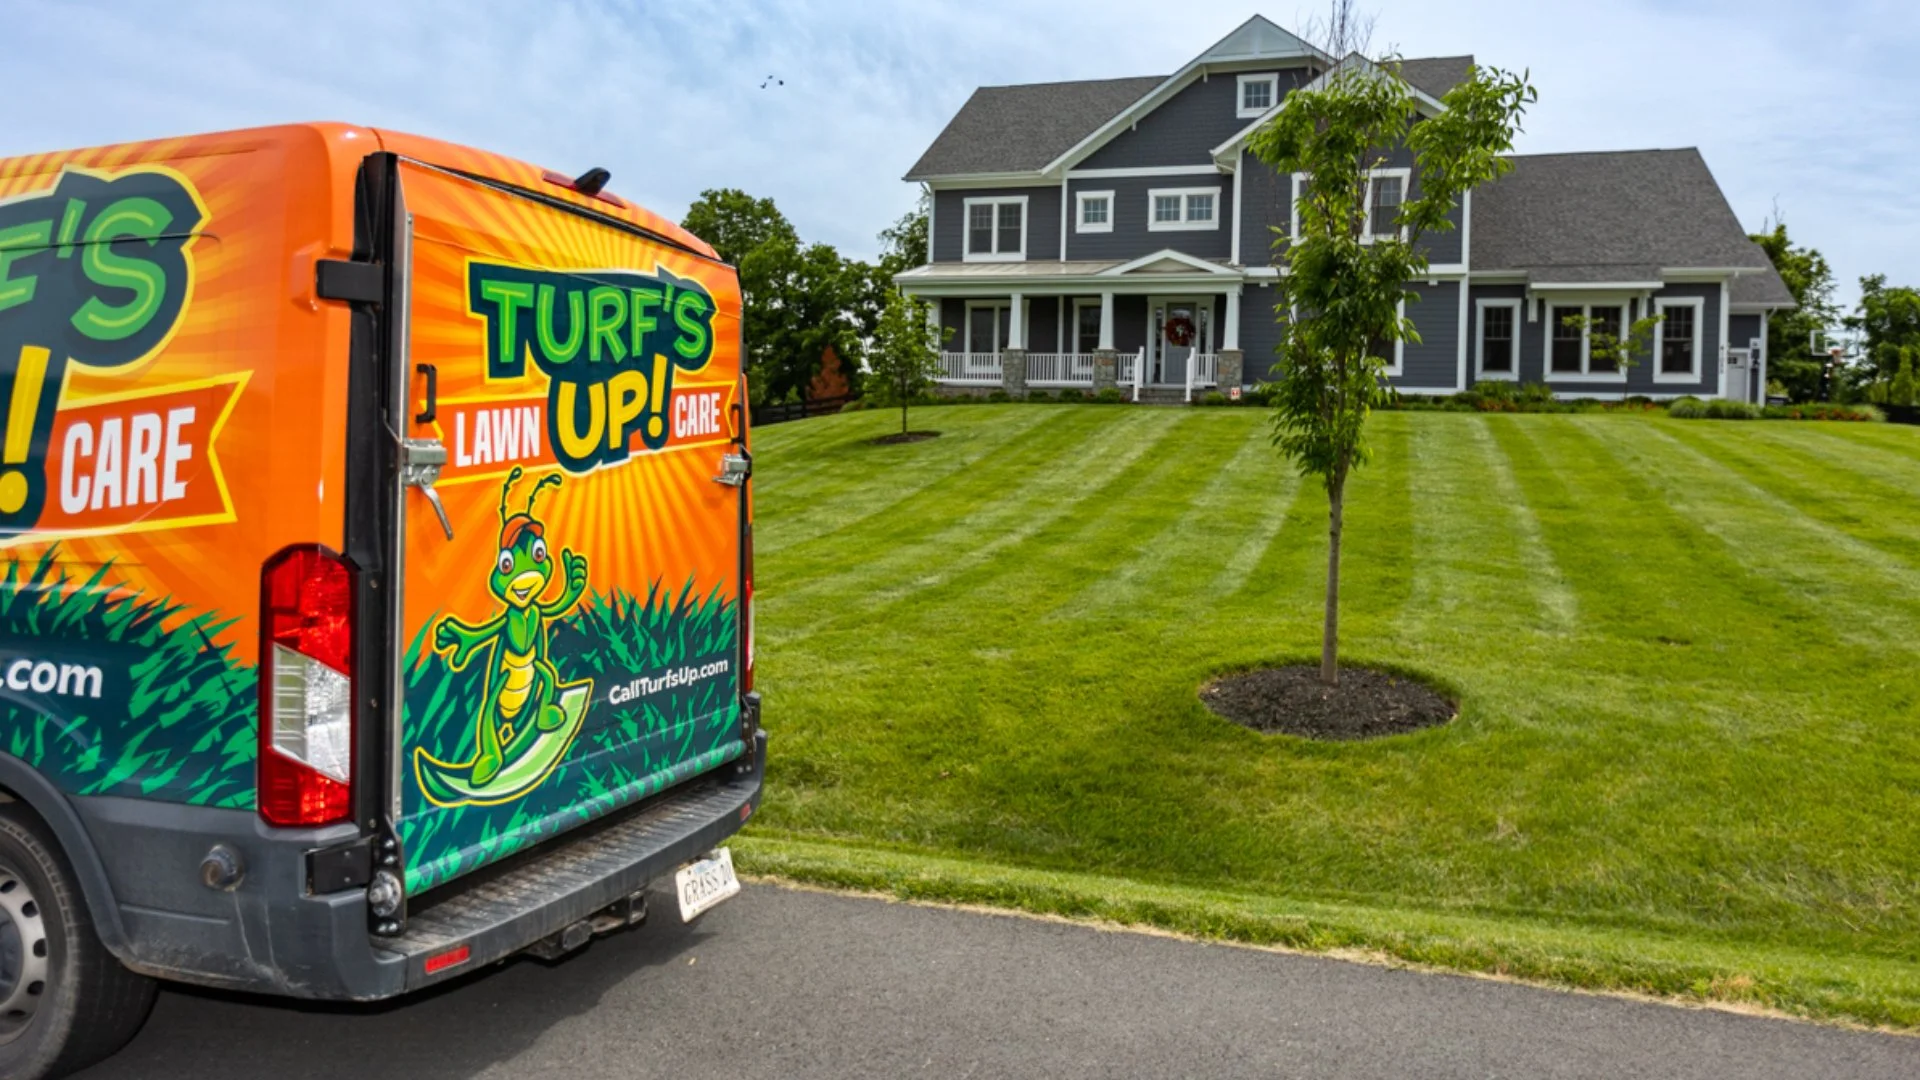 Turf's Up Lawn Care company truck.